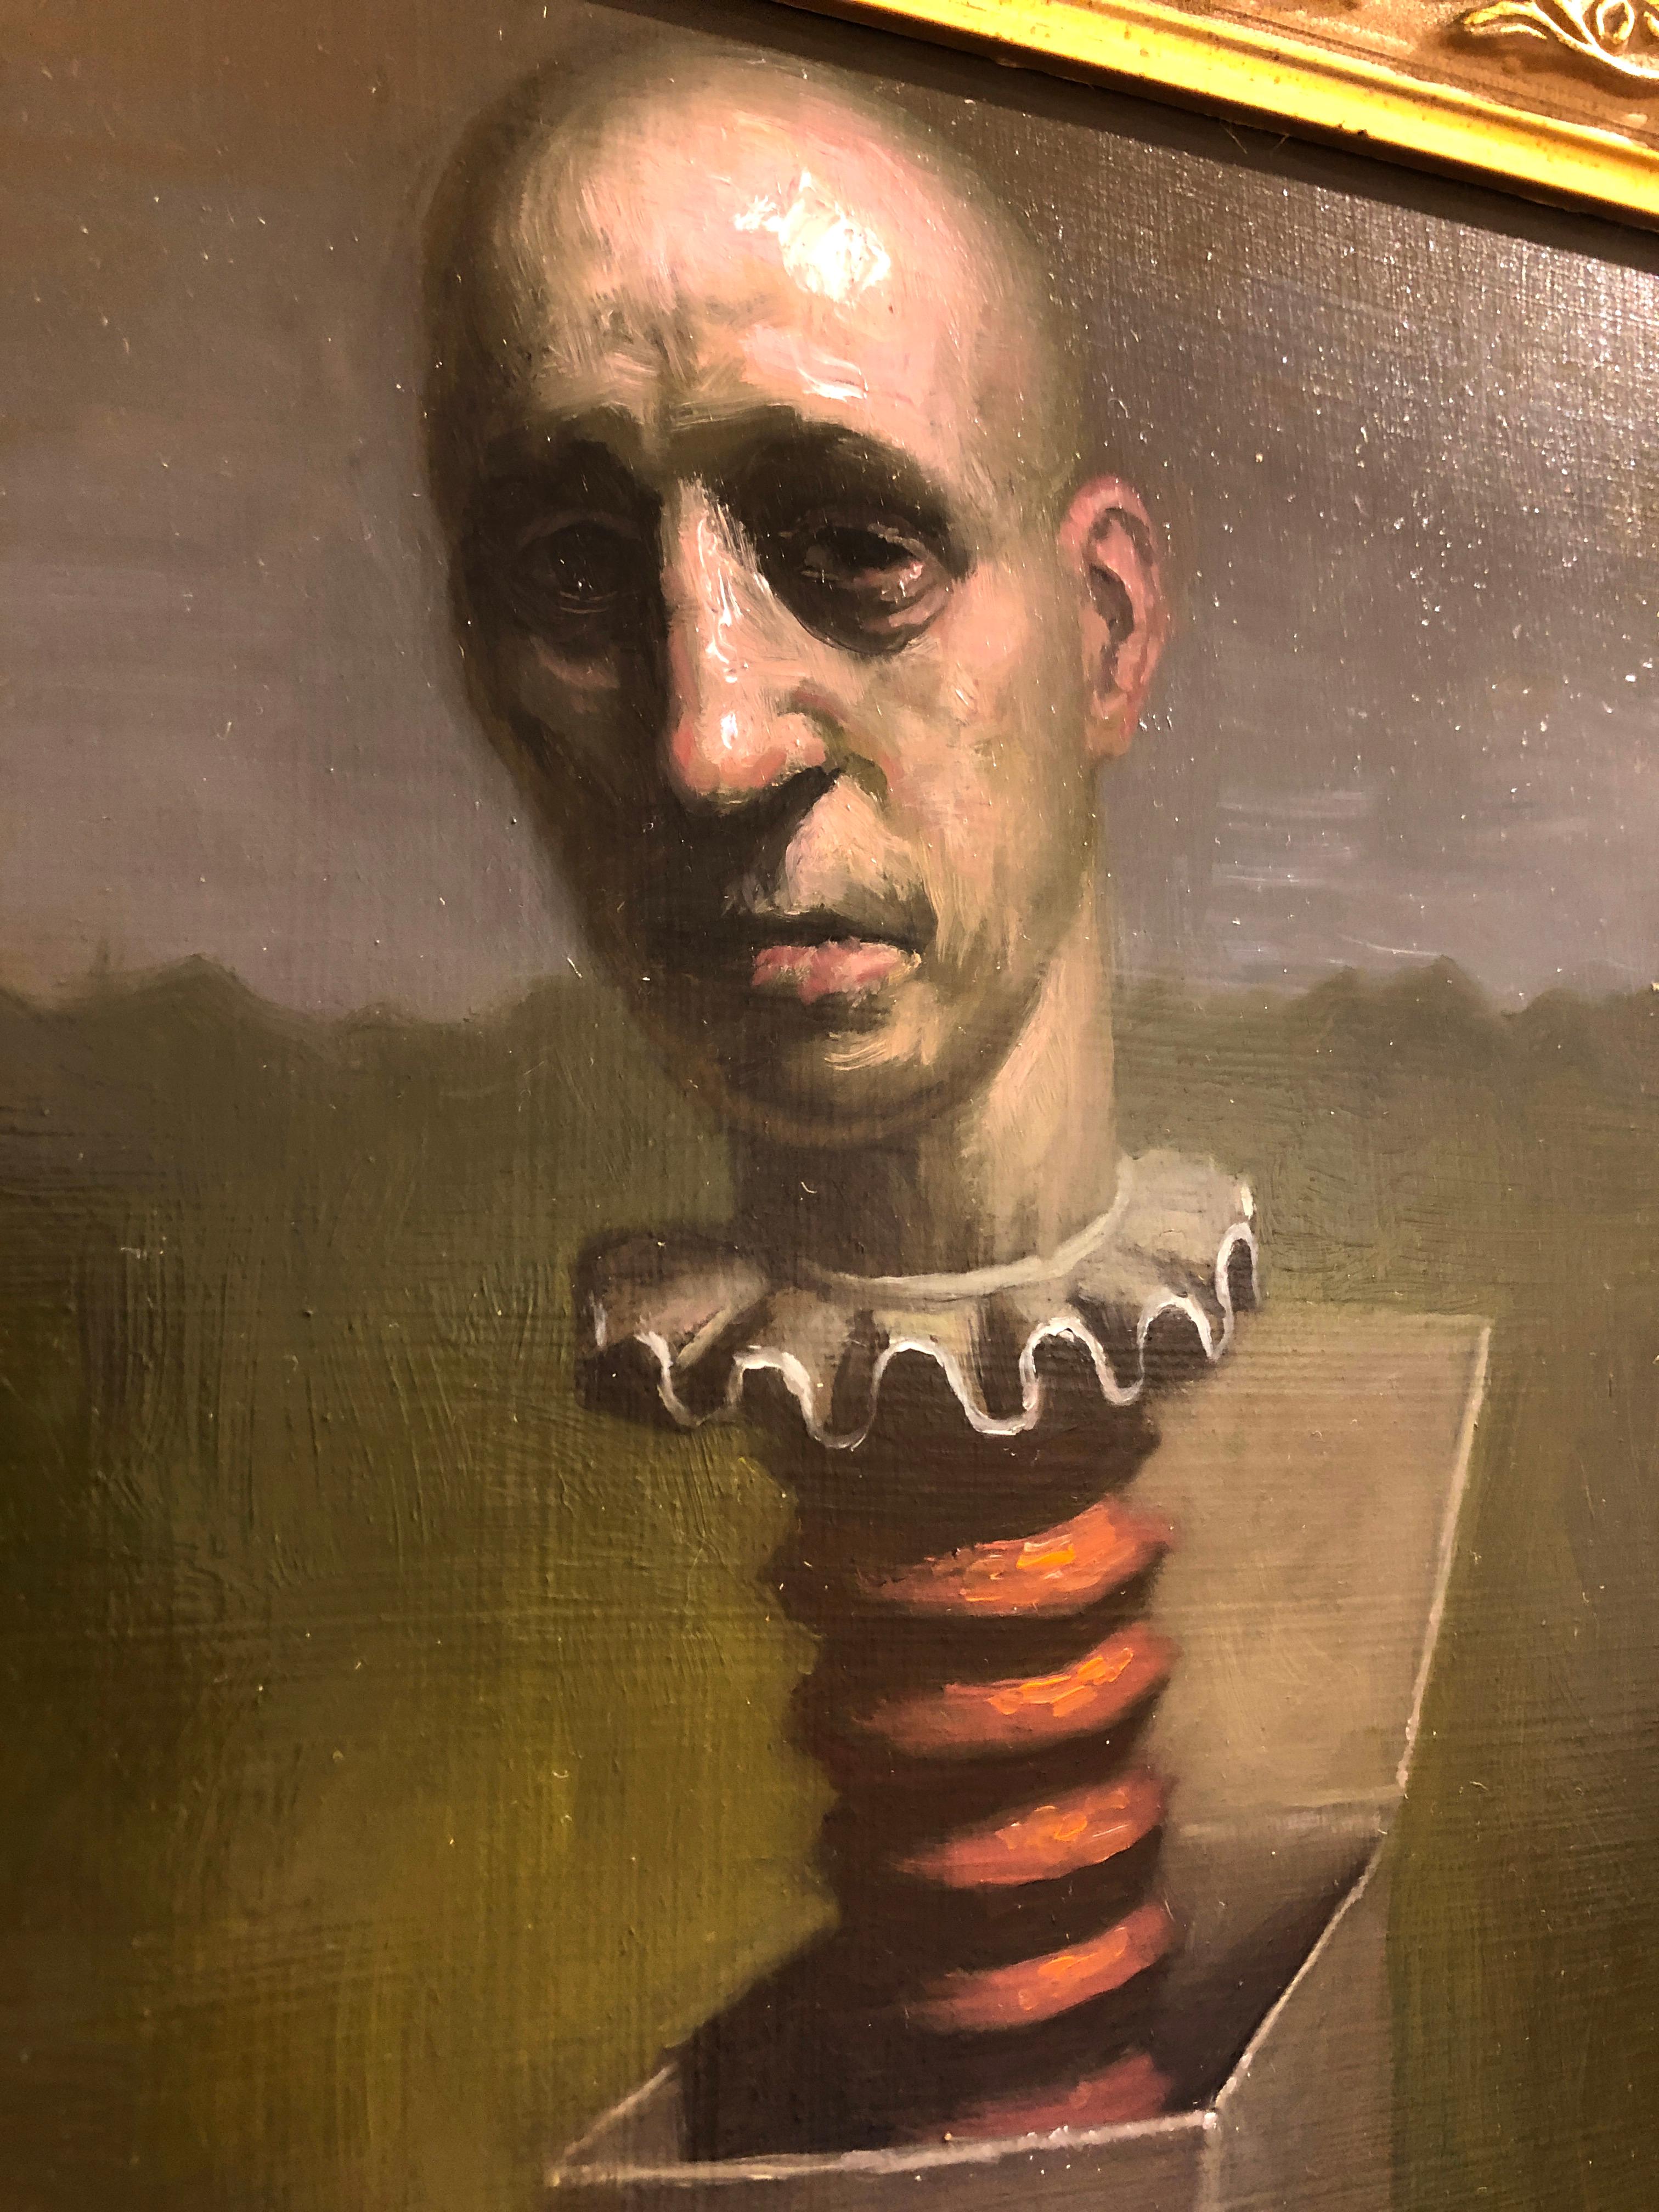 Man Thinking Outside the Box, Avery Palmer, Oil on board, pop surreal figure 5